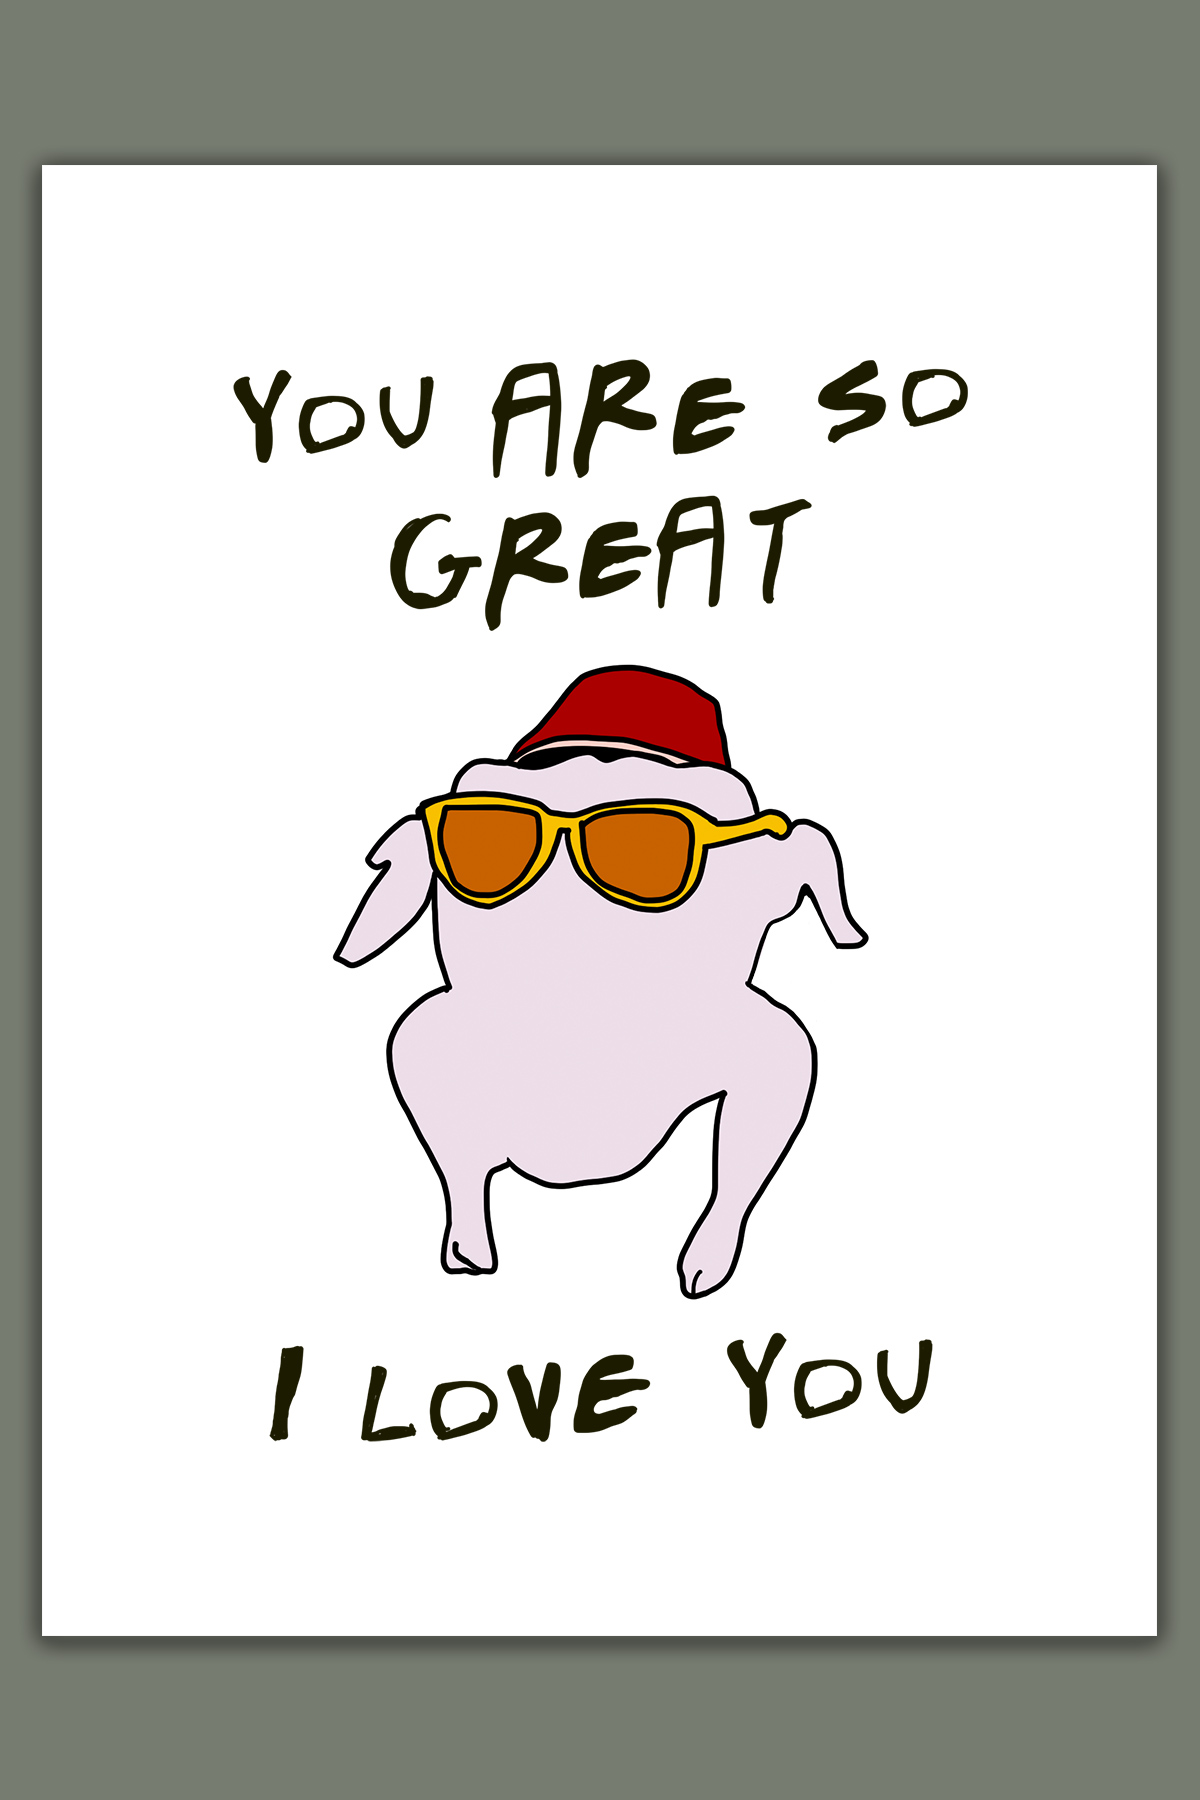 This image shows one of the printable thanksgiving cards you can get for free at the end of this post. This card says you are so great I love you with a raw turkey with yellow sunglasses and a hat (to look like the one from the Thanksgiving episode of Friends).